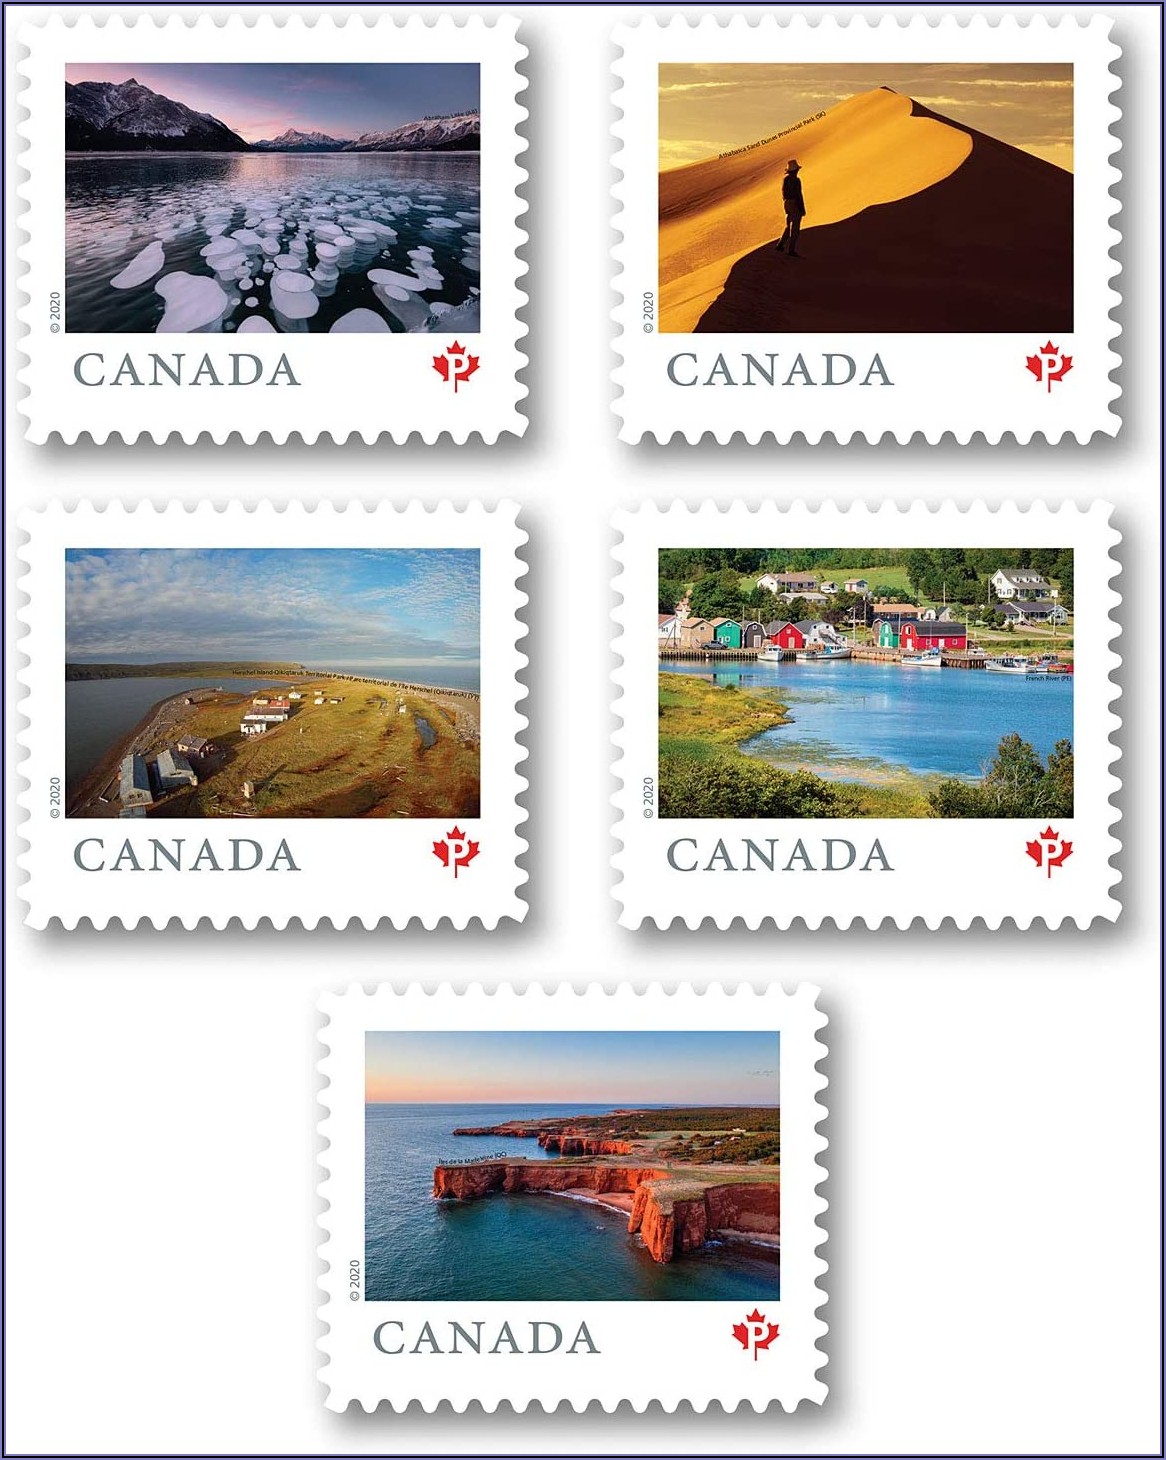 Postage For 9x12 Envelope To Canada